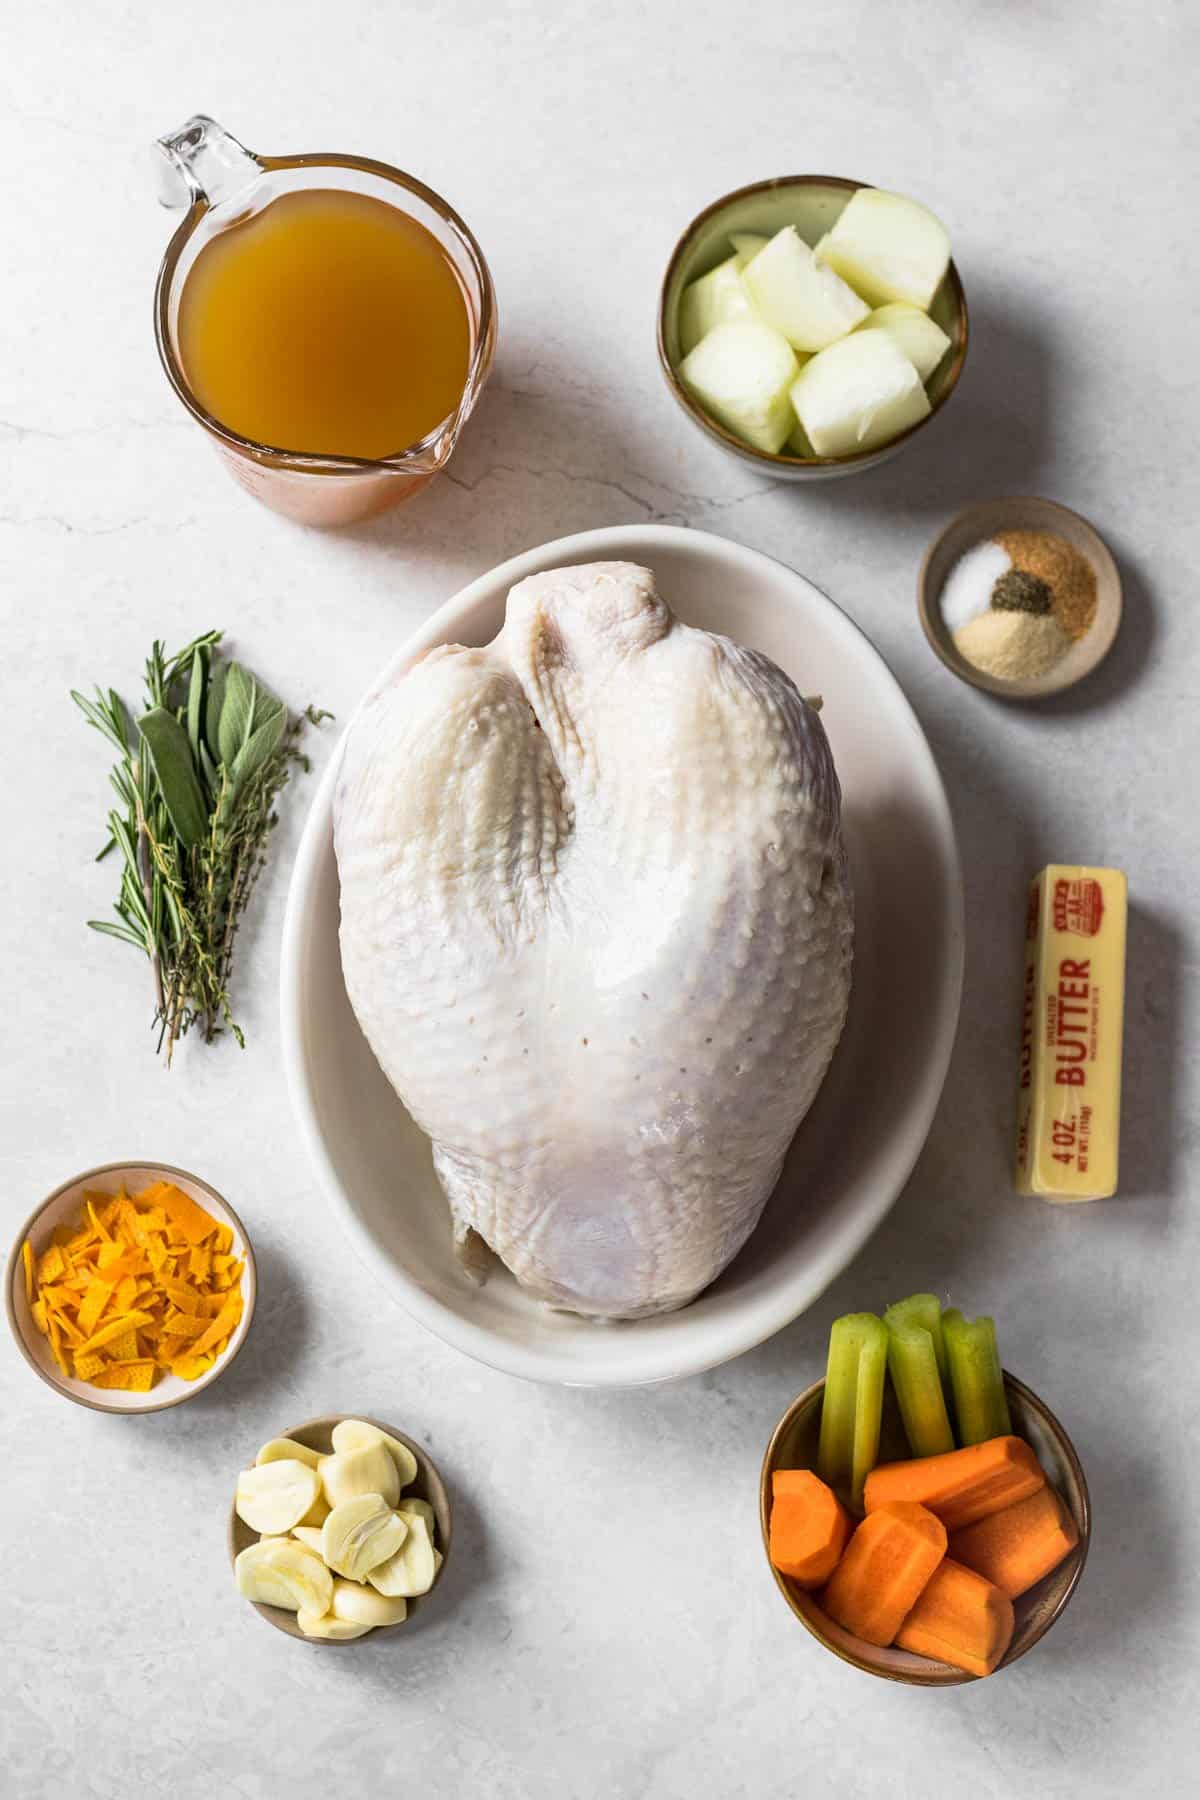 ingredients for bone in turkey breast - turkey broth, whole bone-in breast with skin, quartered onions, seasonings, stick of butter, celery sticks, sliced carrots, garlic cloves, julienned orange peel, rosemary, thyme and sage leaves.